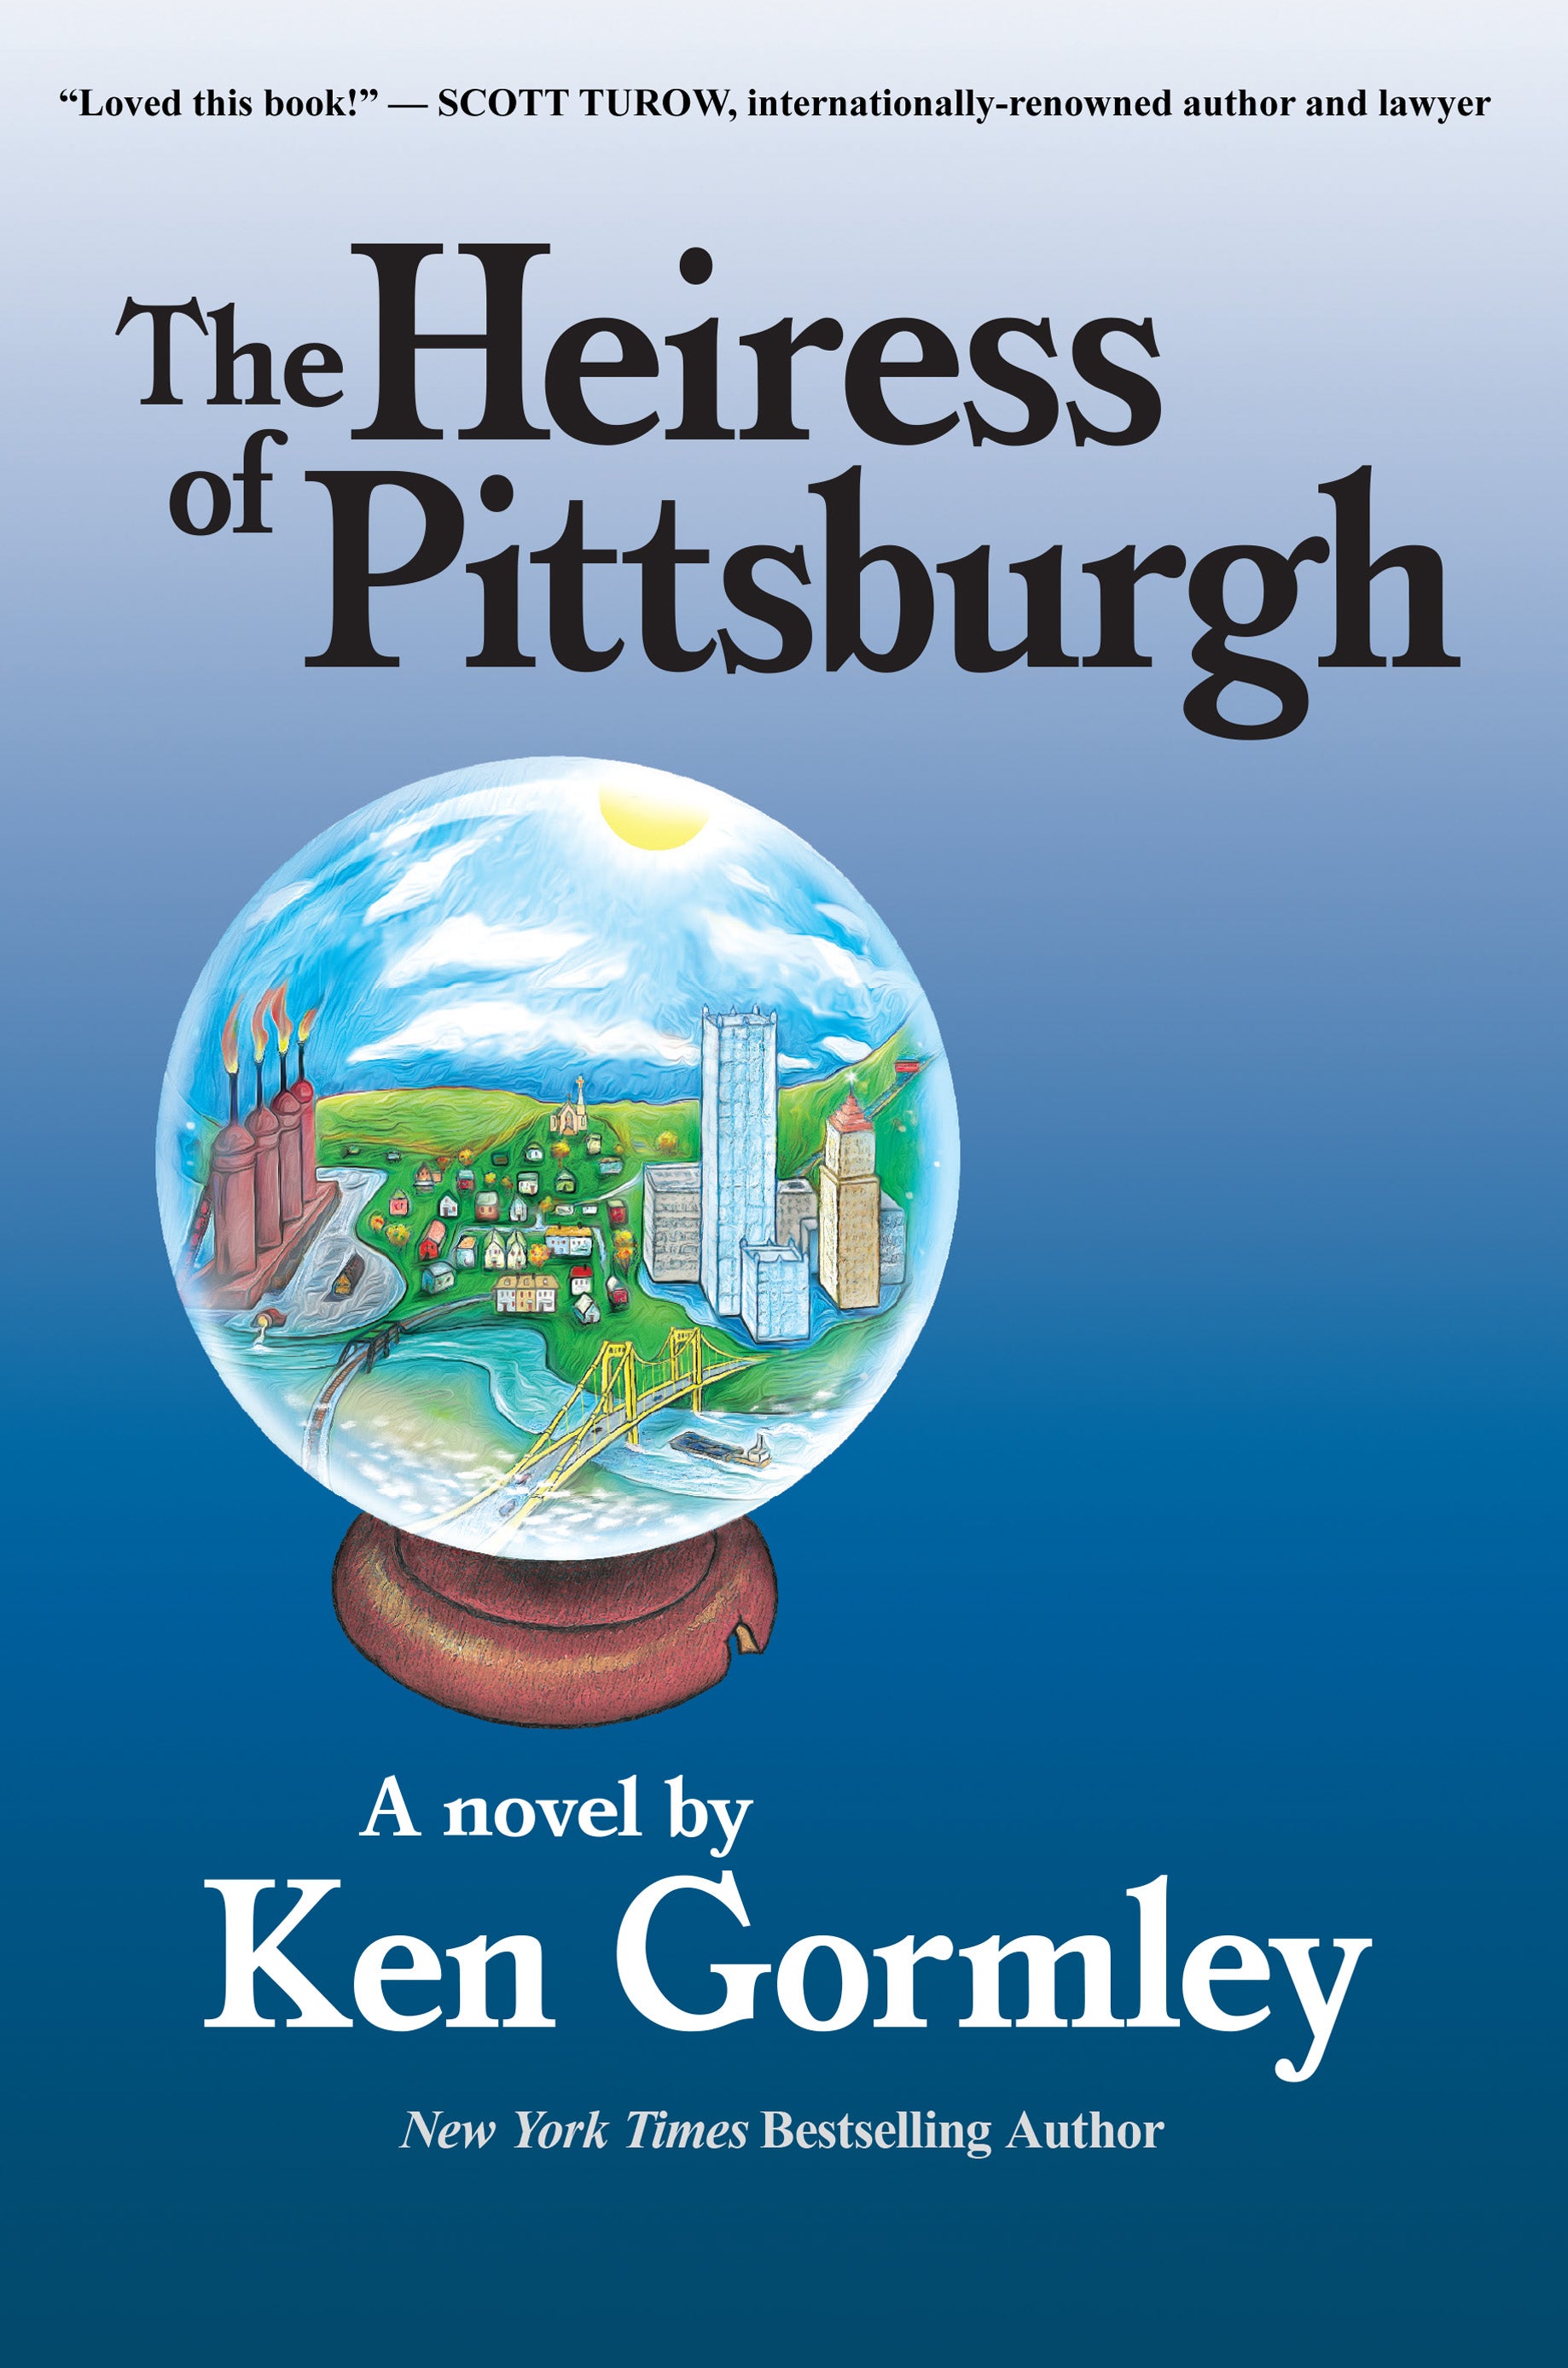 The Heiress of Pittsburgh book cover, with Pittsburgh contained in a crystal ball